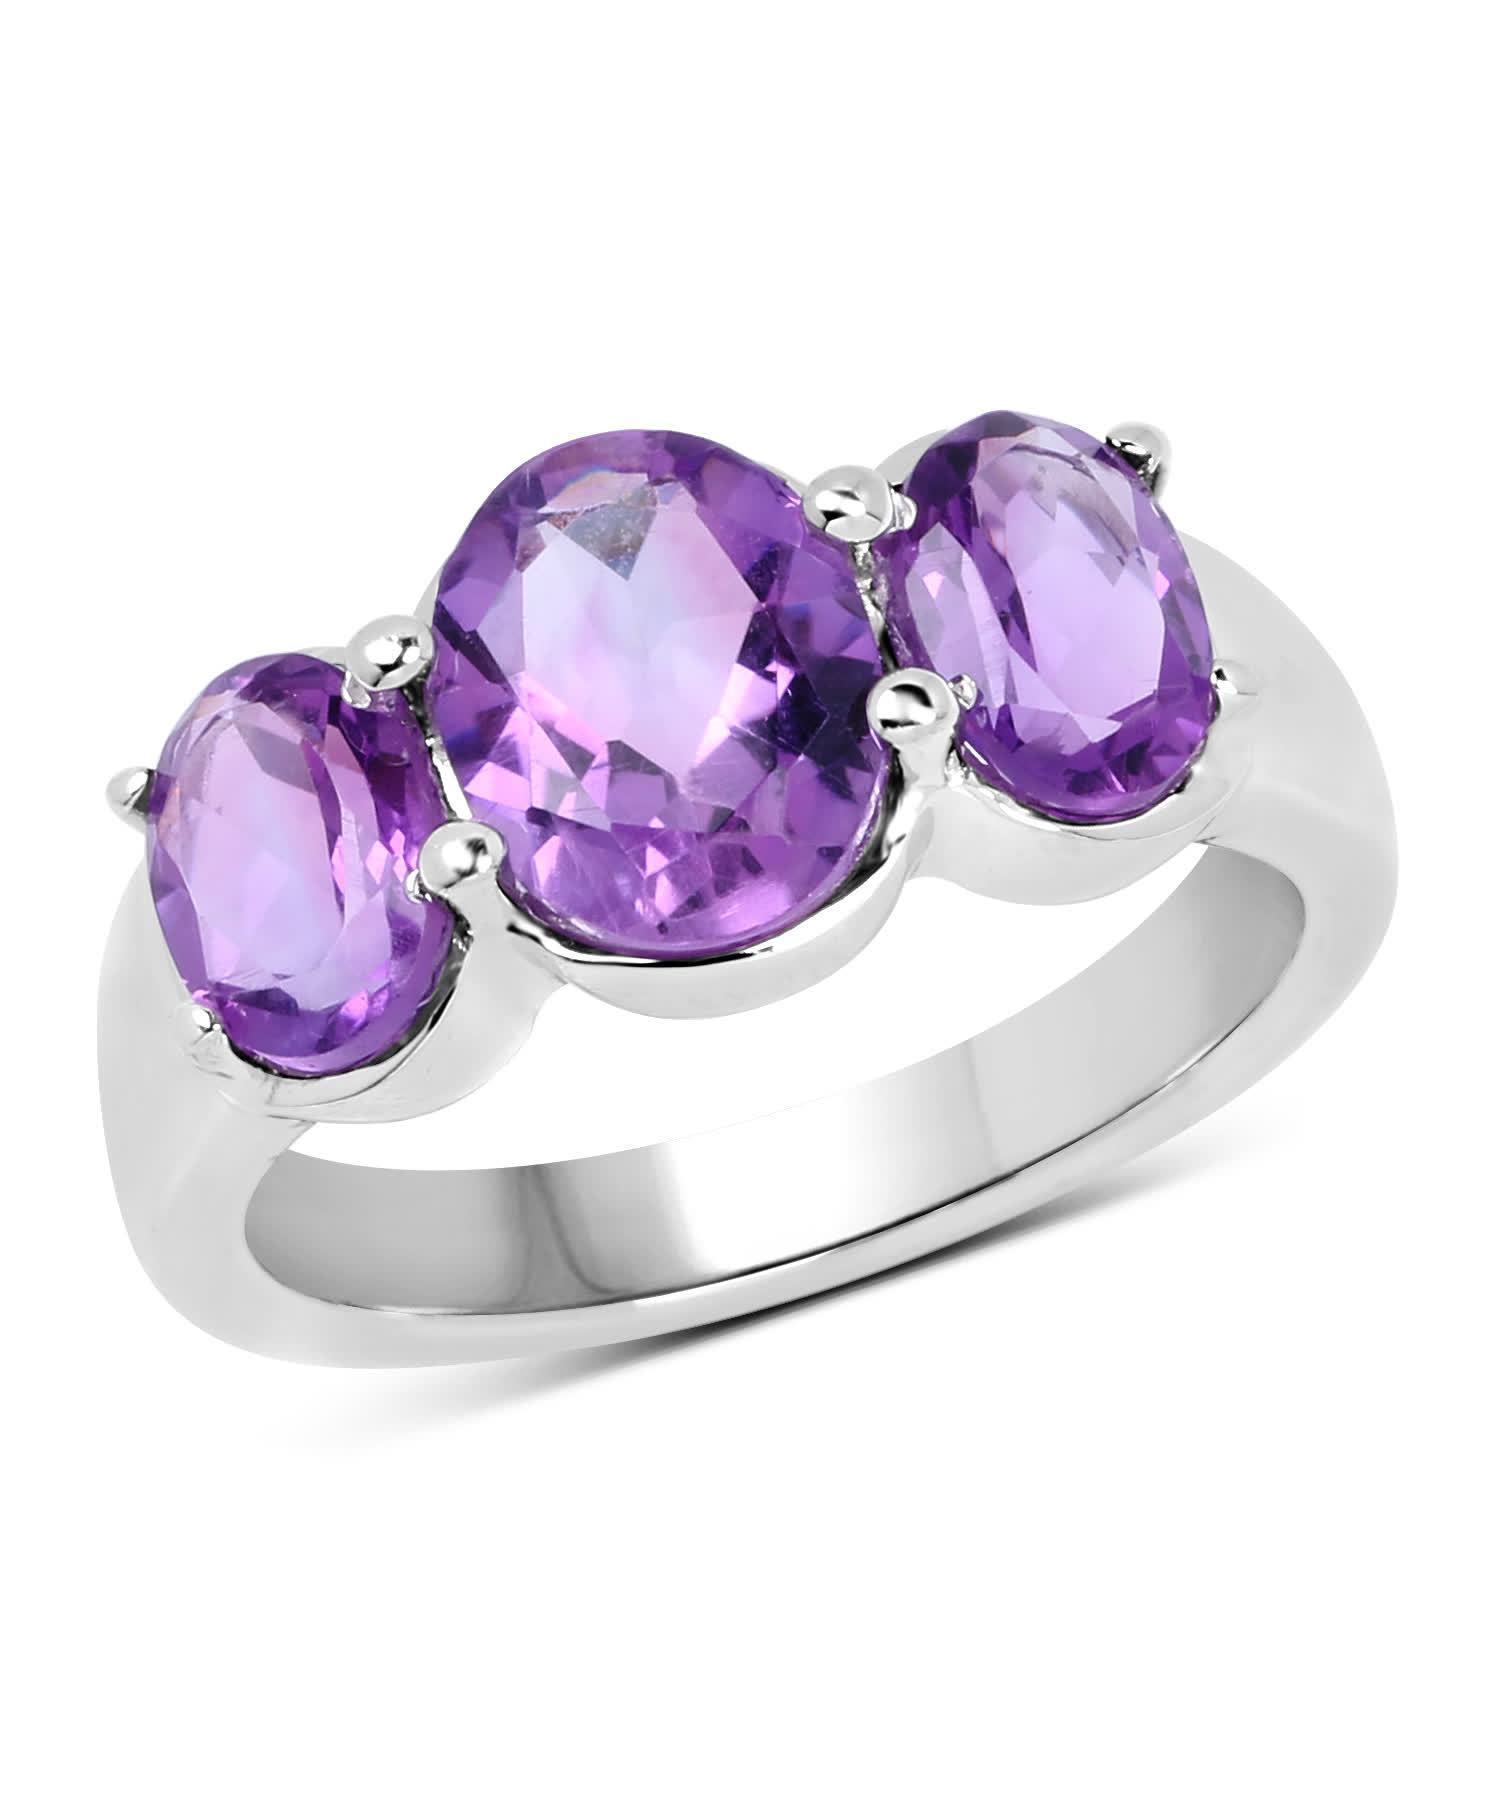 3.20ctw Natural Amethyst Rhodium Plated 925 Sterling Silver Classic Three-Stone Ring View 1